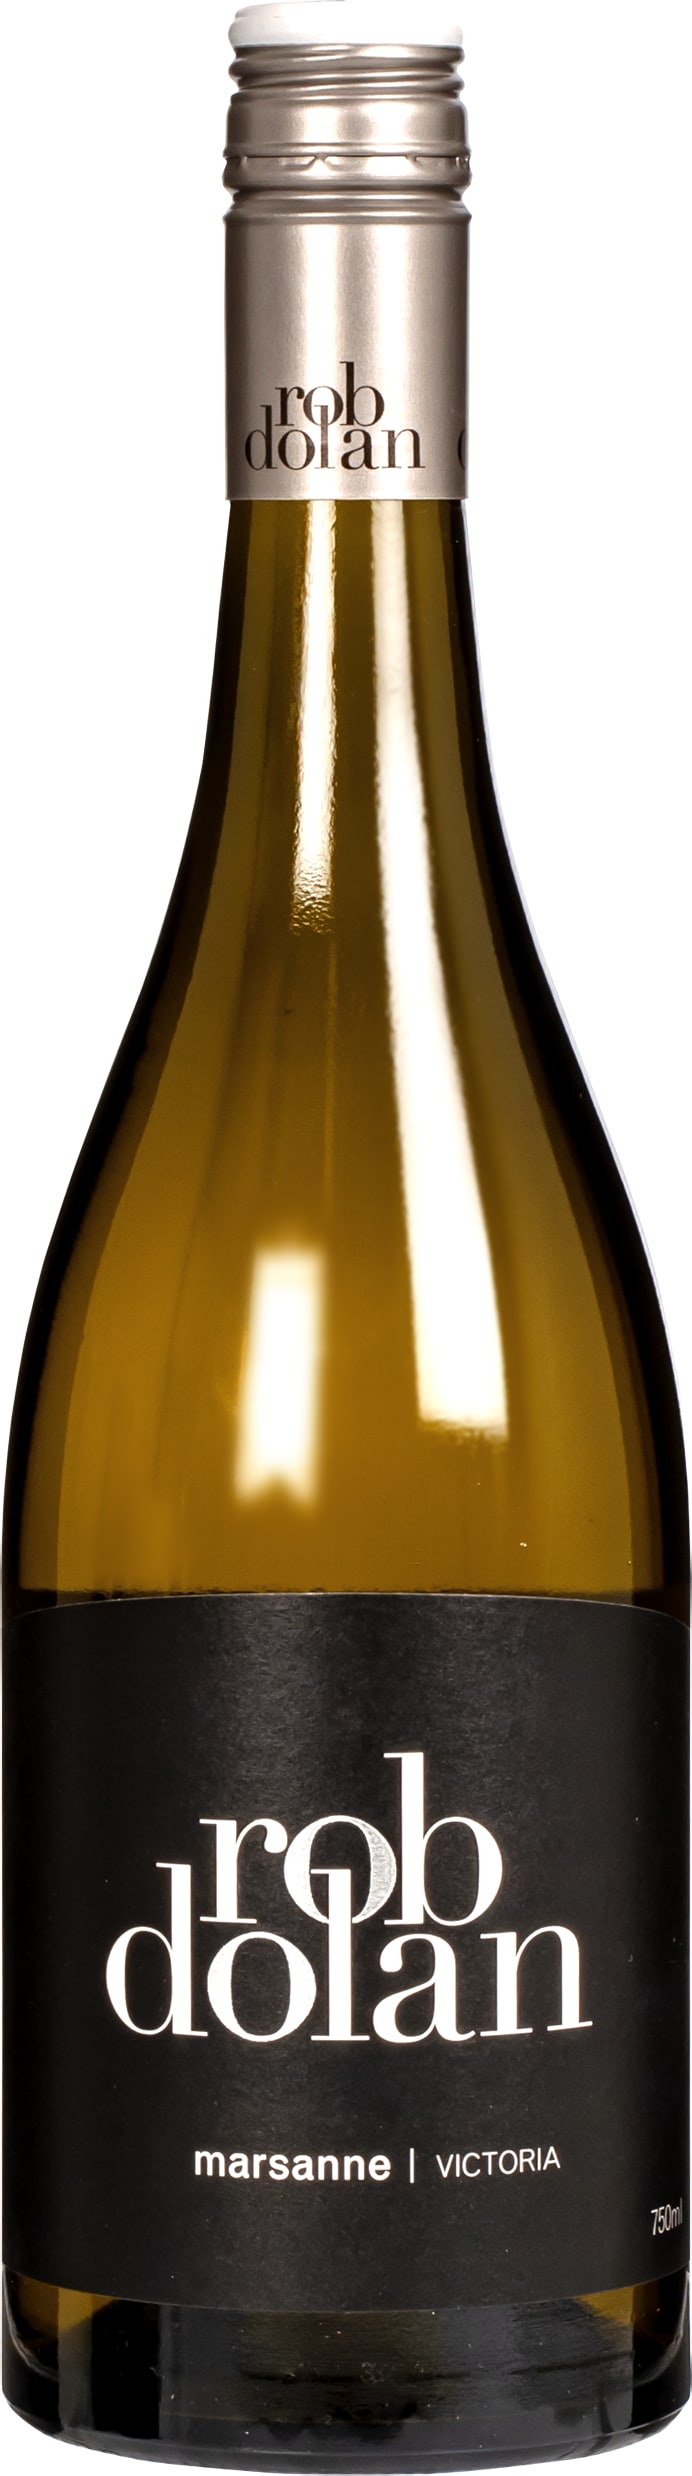 Rob Dolan Black Label Marsanne 2021 75cl - Buy Rob Dolan Wines from GREAT WINES DIRECT wine shop